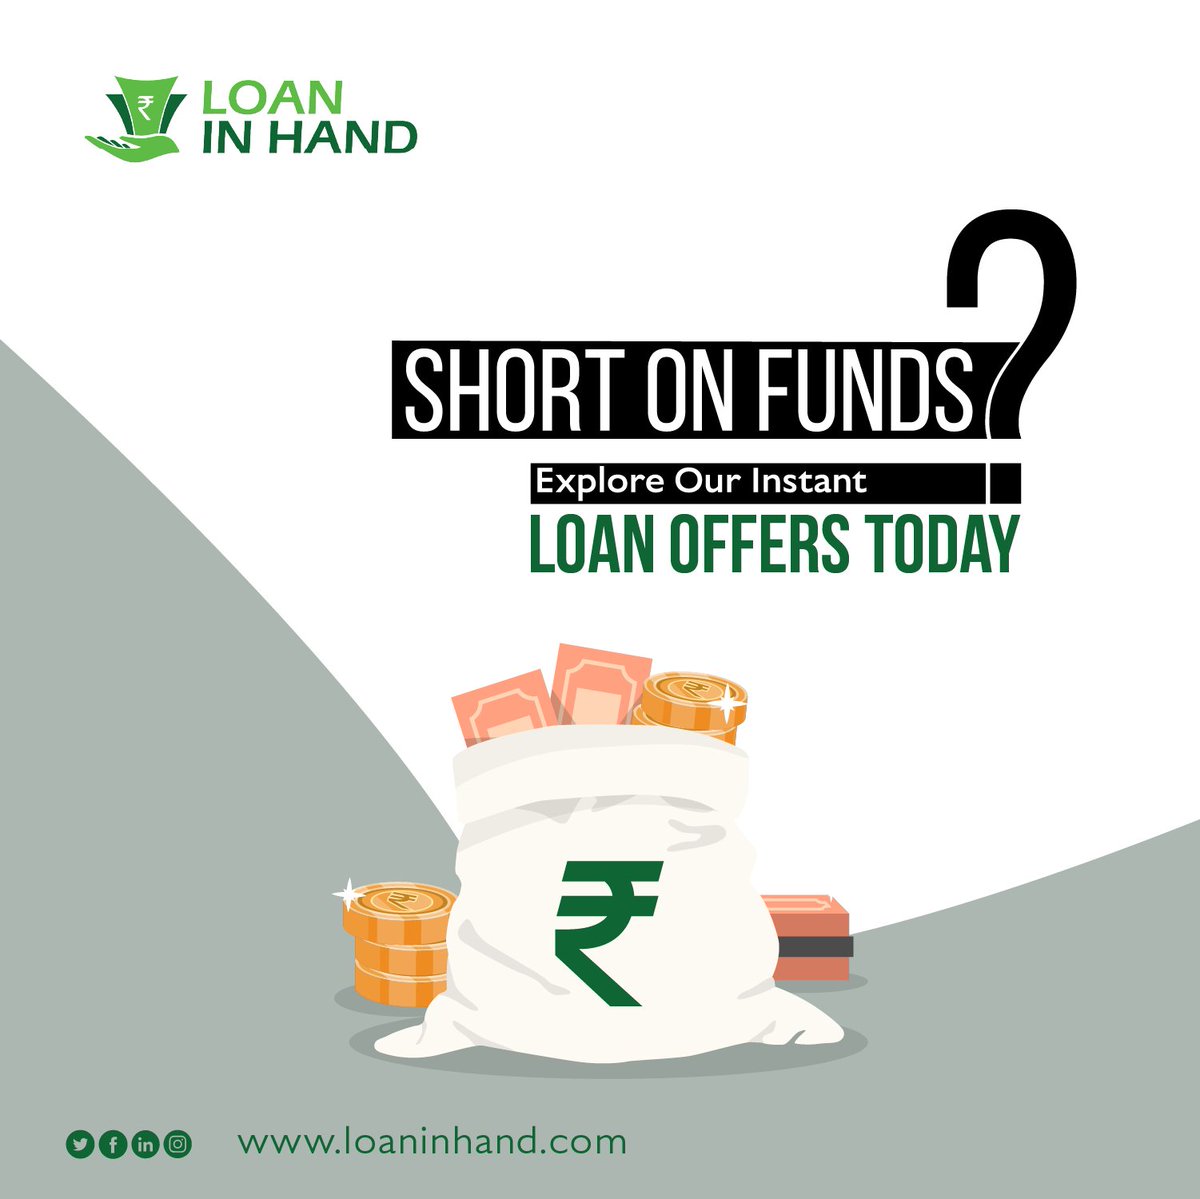 Our tailored loan solutions cater to your immediate financial needs. 

#shorttermloans #instantloan #loan #loanprovider #loanservices #emiloan #business #money #finance #shorttermbusiness #buinessloan #instantbusinesloan #onlineloan #onlinebusinessloan #loanservice